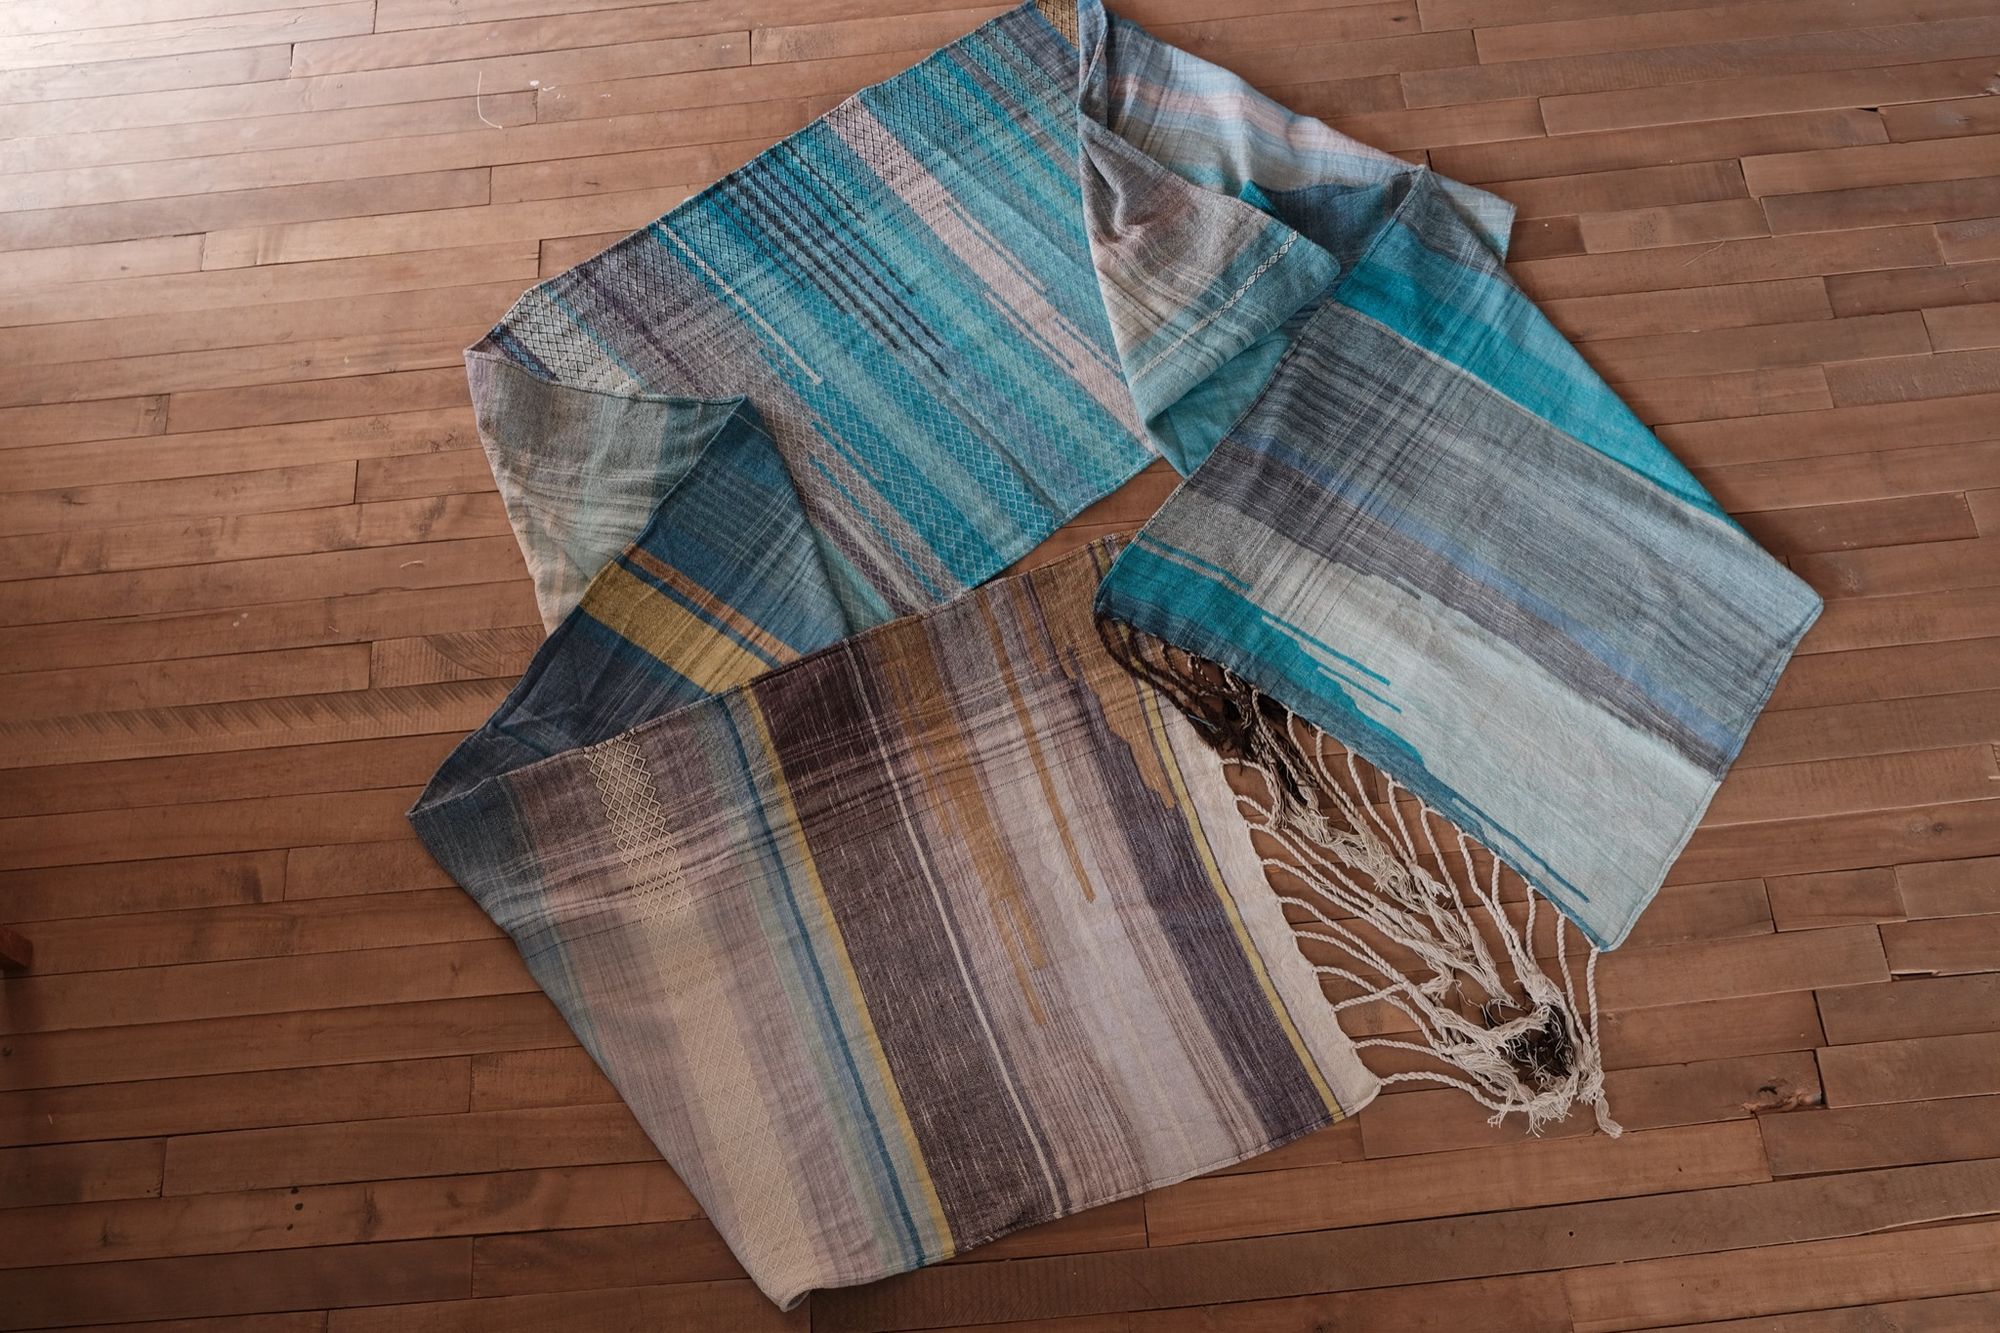 Handwoven fabric in all shades of blue, with details of white and golden yellow, laid out on a wood floor.